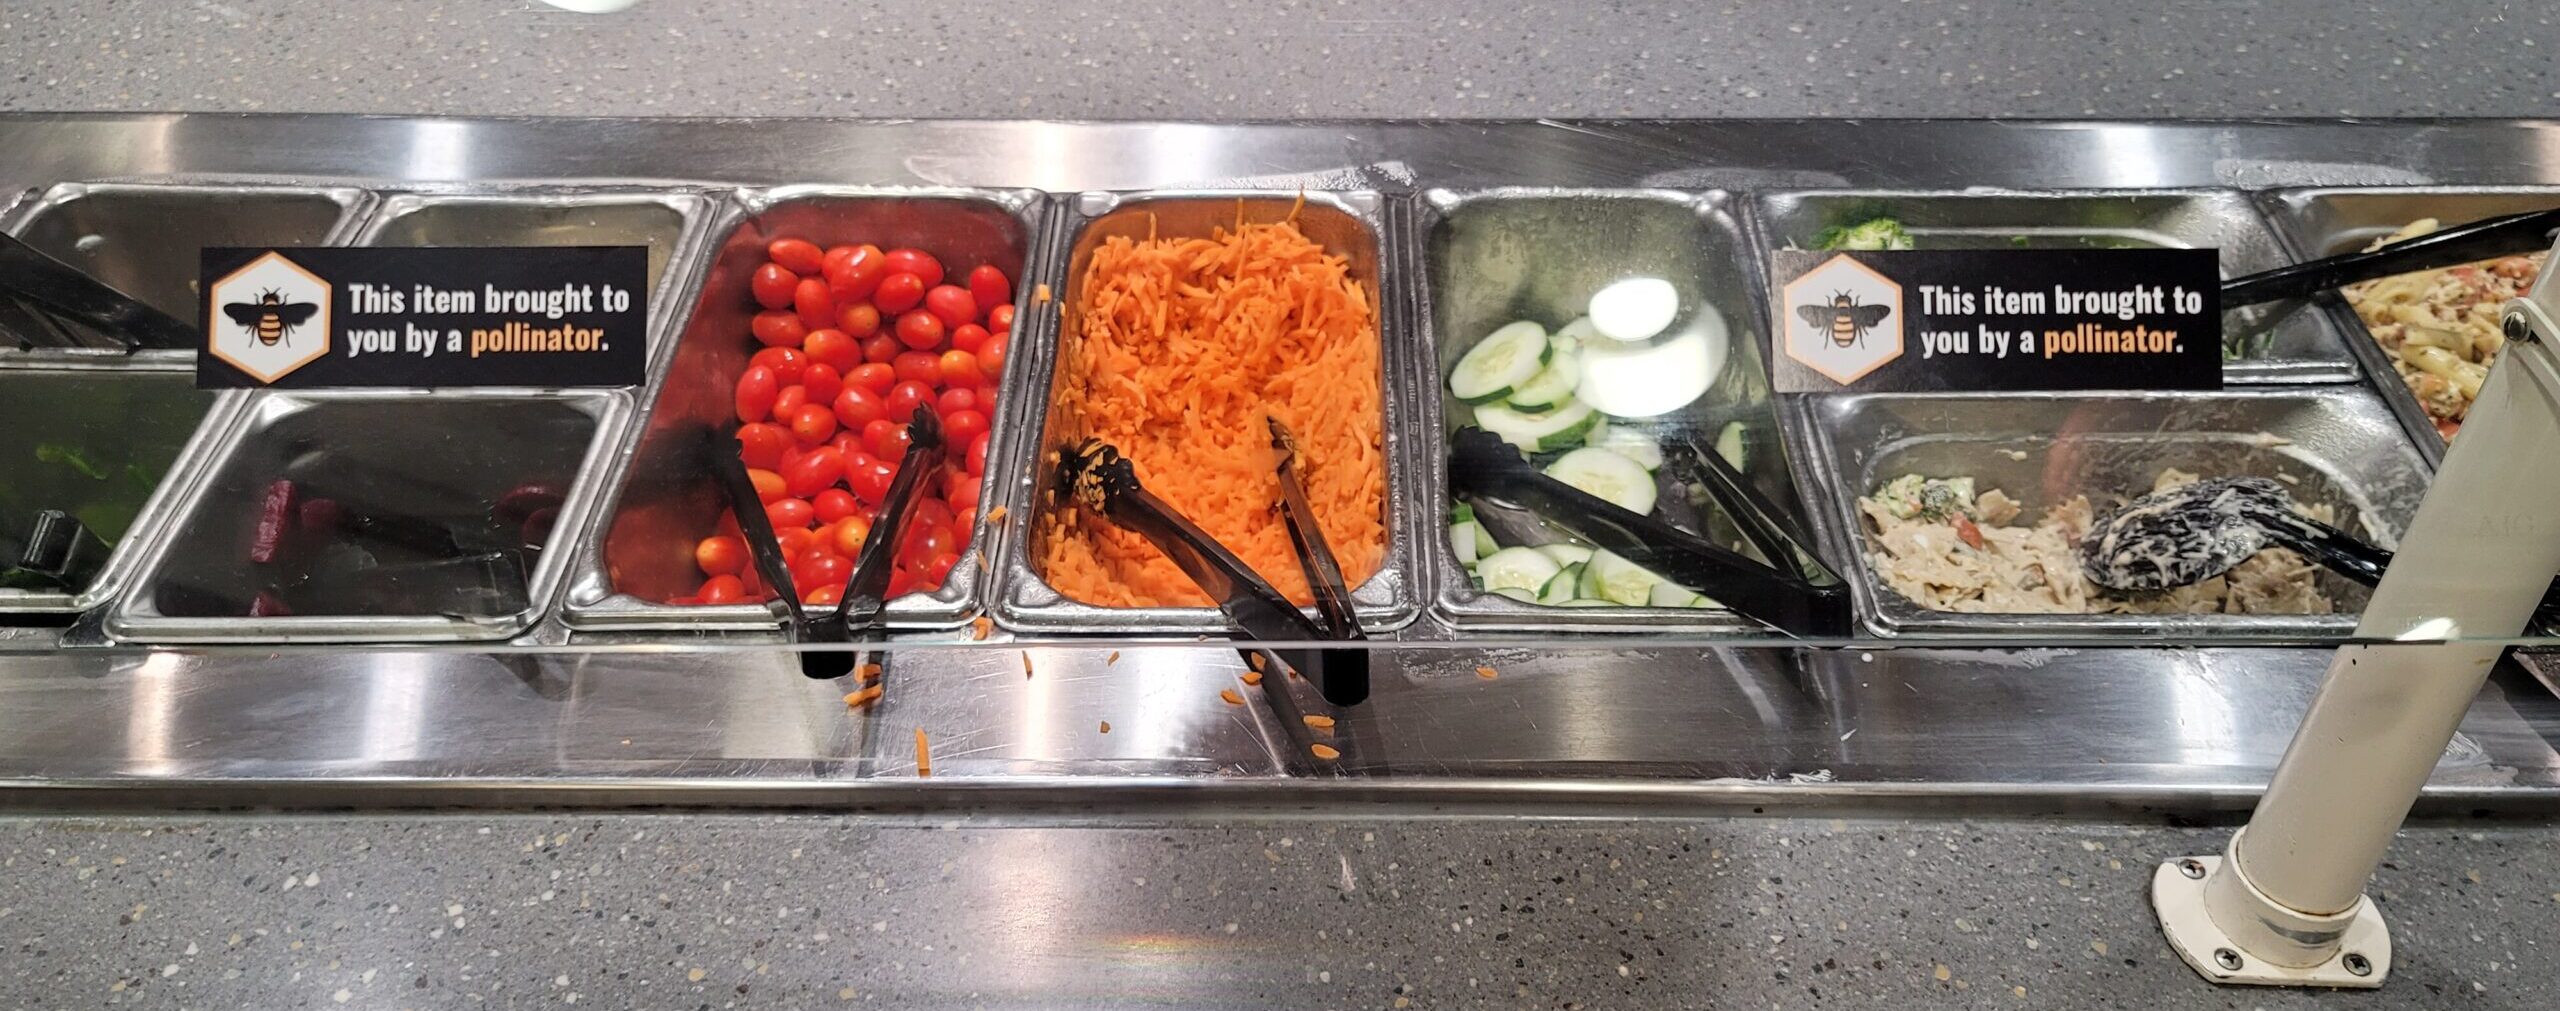 Vegetables in metal cafeteria trays with 2 stickers on glass guard saying "This item brought to you by a pollinator